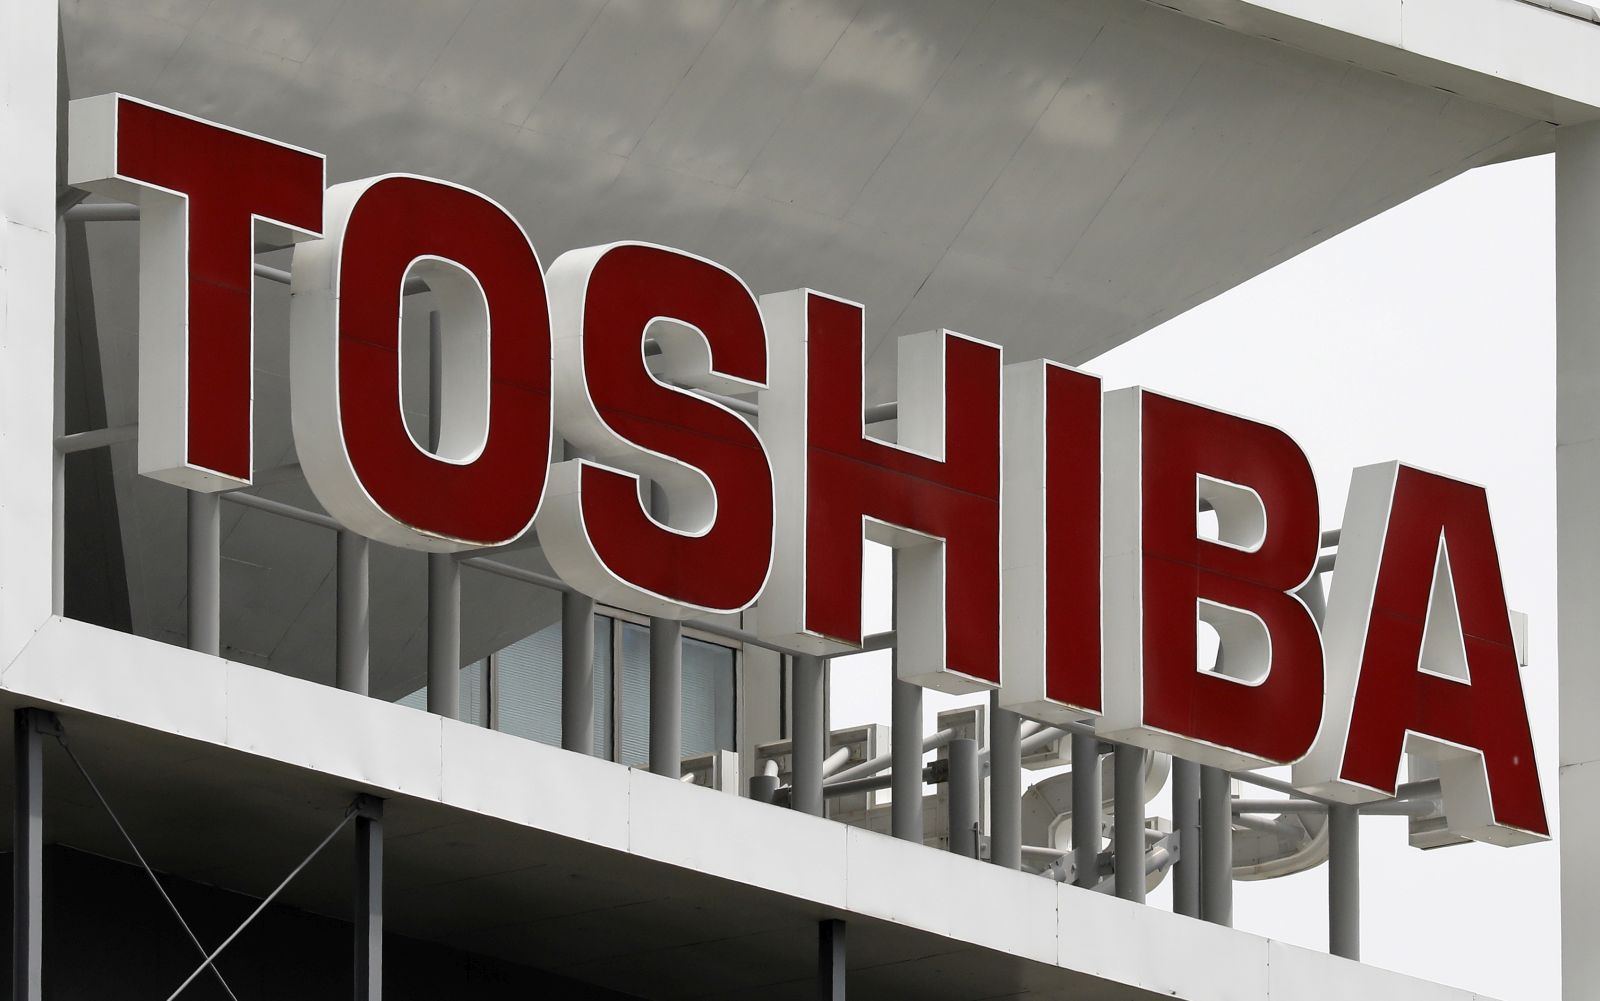 epa09119749 (FILE) - The logo of Toshiba Corp. is displayed at its headquarters in Tokyo, Japan, 15 May 2017 (reissued 07 April 2021). On 07 April 2021, a report from Toshiba Corp. revealed that British investment fund firm CVC Capital Partners proposed an acquisition of the Tokyo-based conglomerate.  EPA/KIMIMASA MAYAMA